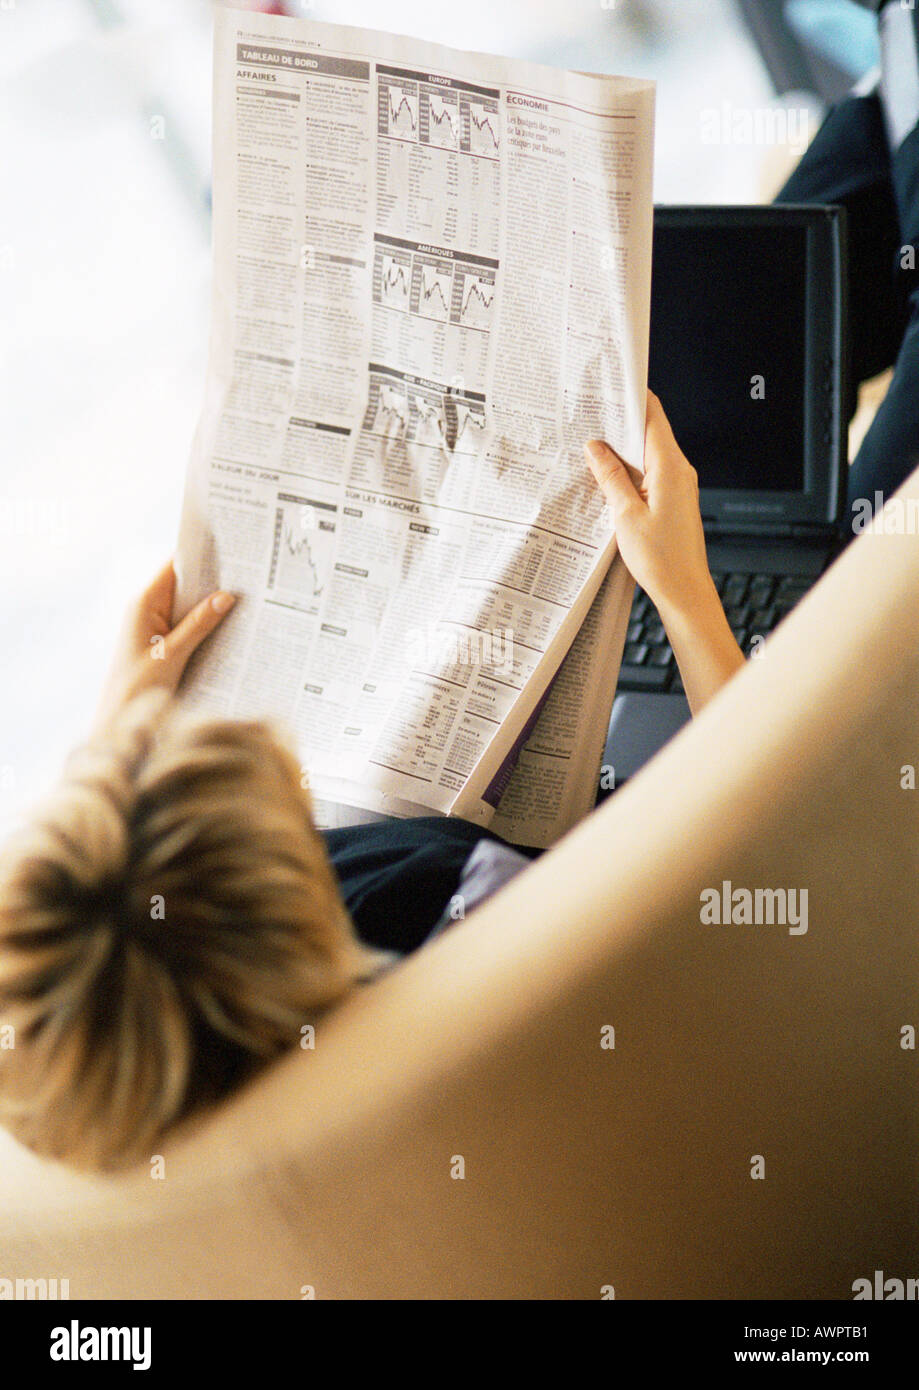 Woman reading newspaper, laptop on lap, rear view, elevated angle. Stock Photo